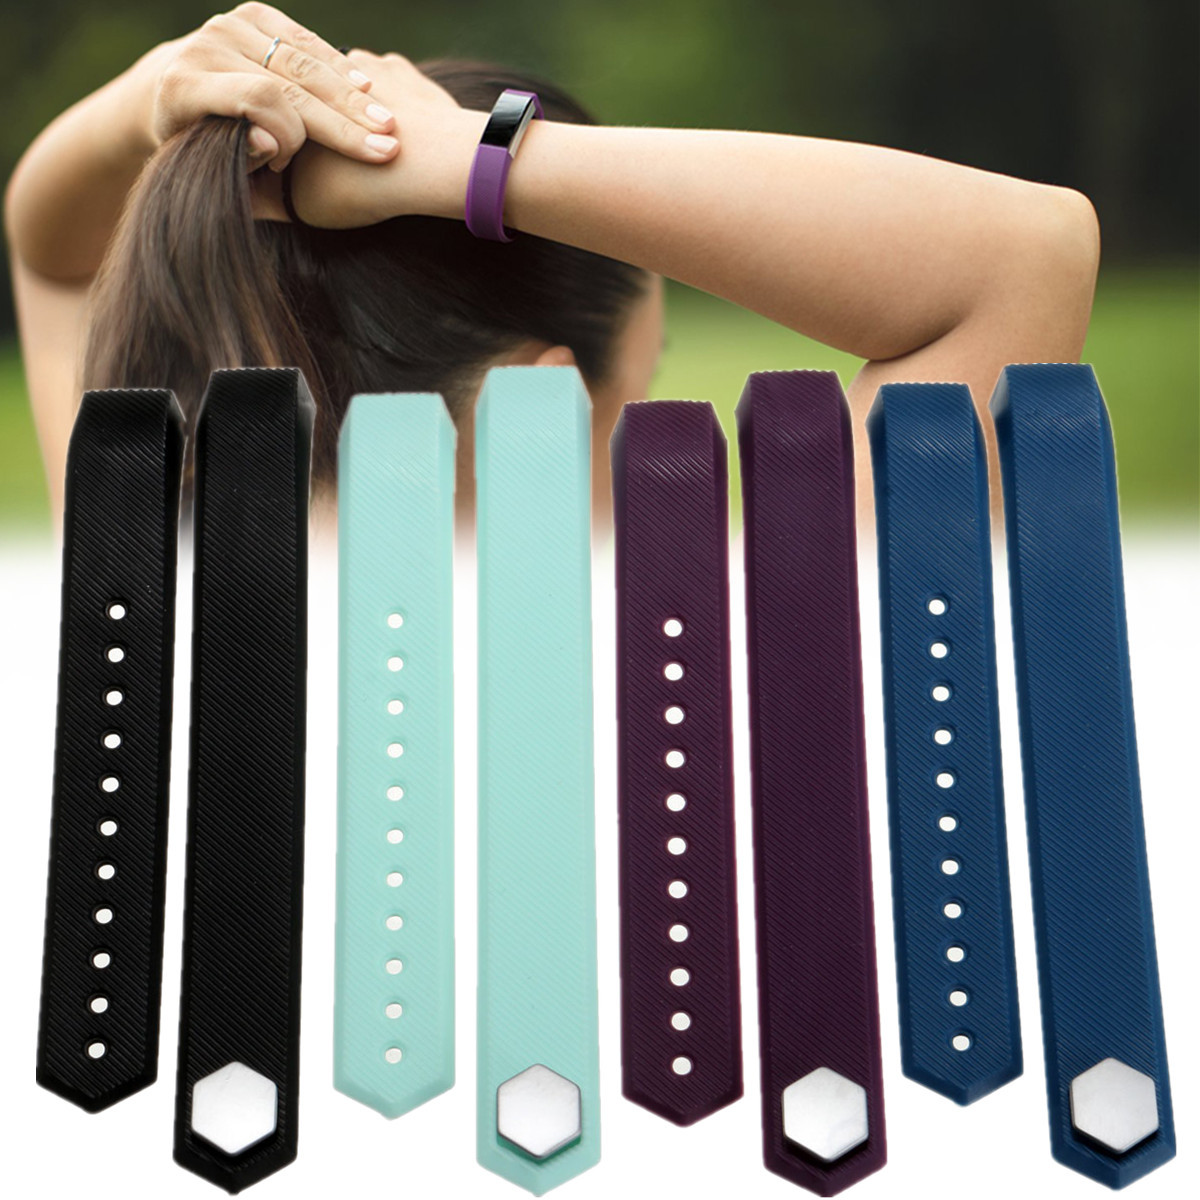 Silicone-Replacement-Wristband-Watch-Band-Strap-Clasp-Small-Size-For-Fitbit-Alta-Tracker-1100052